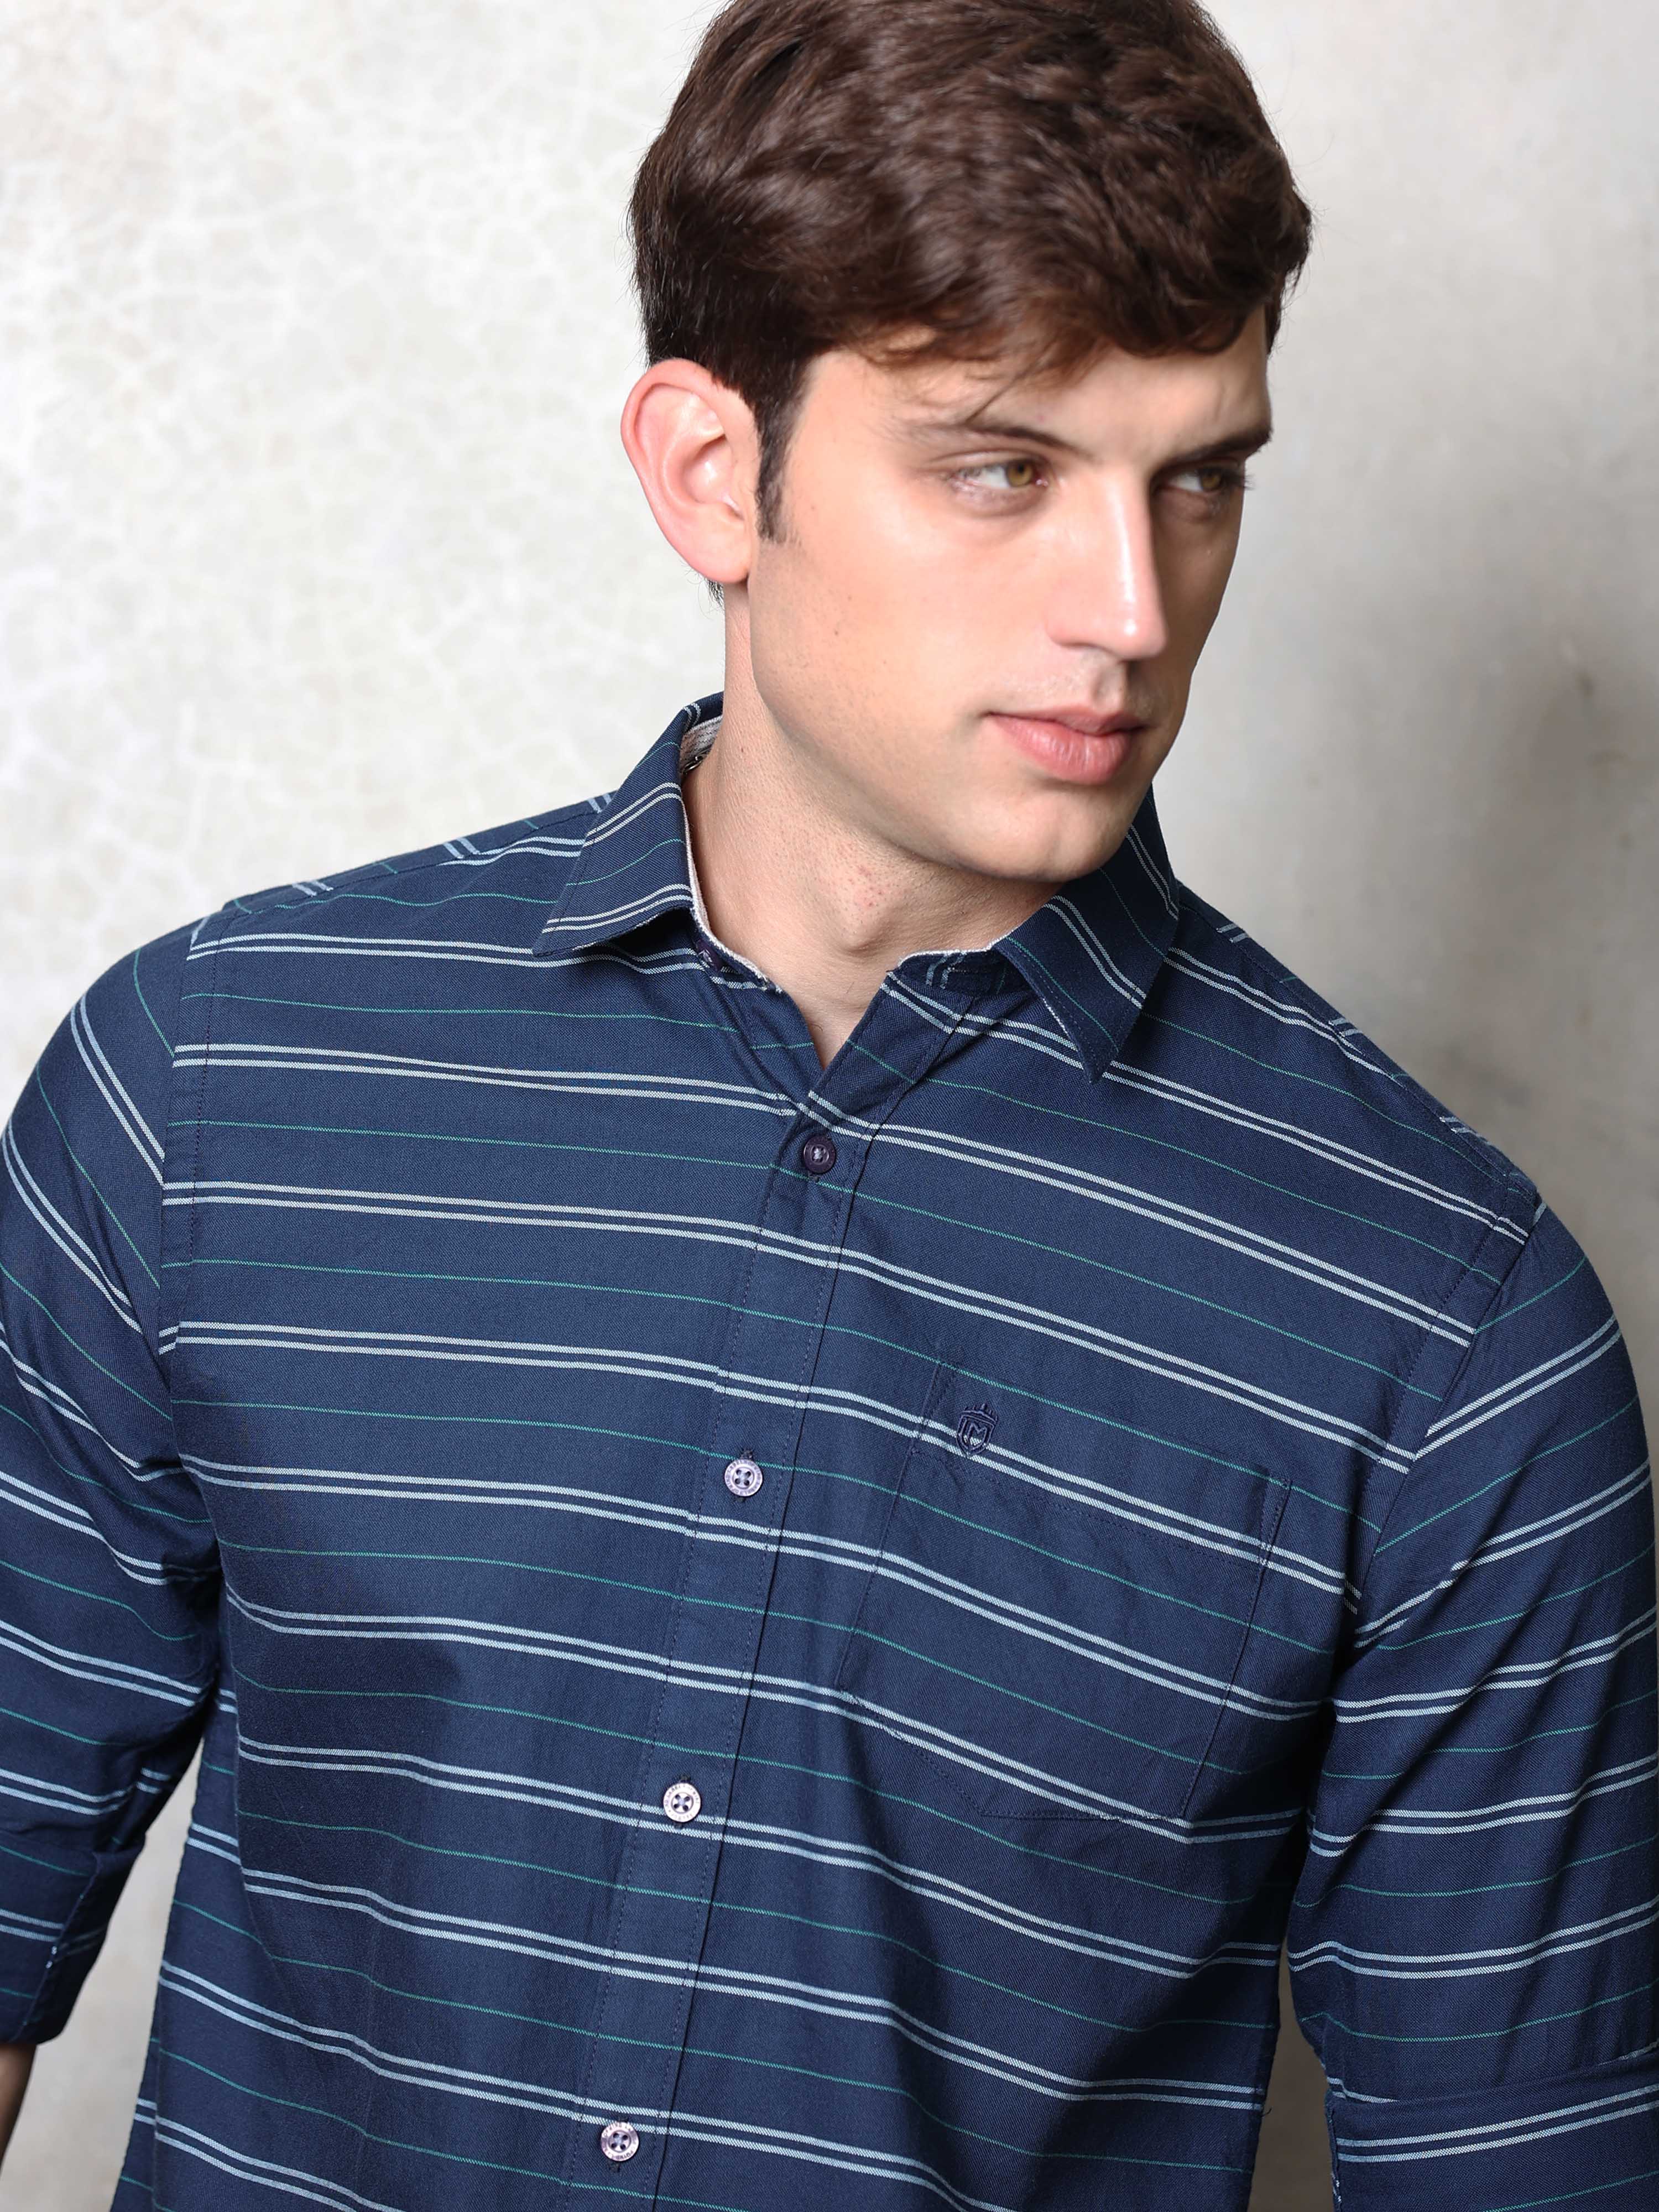 Buy Latest Navy Blue Cotton Striped Shirt For Men OnlineRs. 699.00